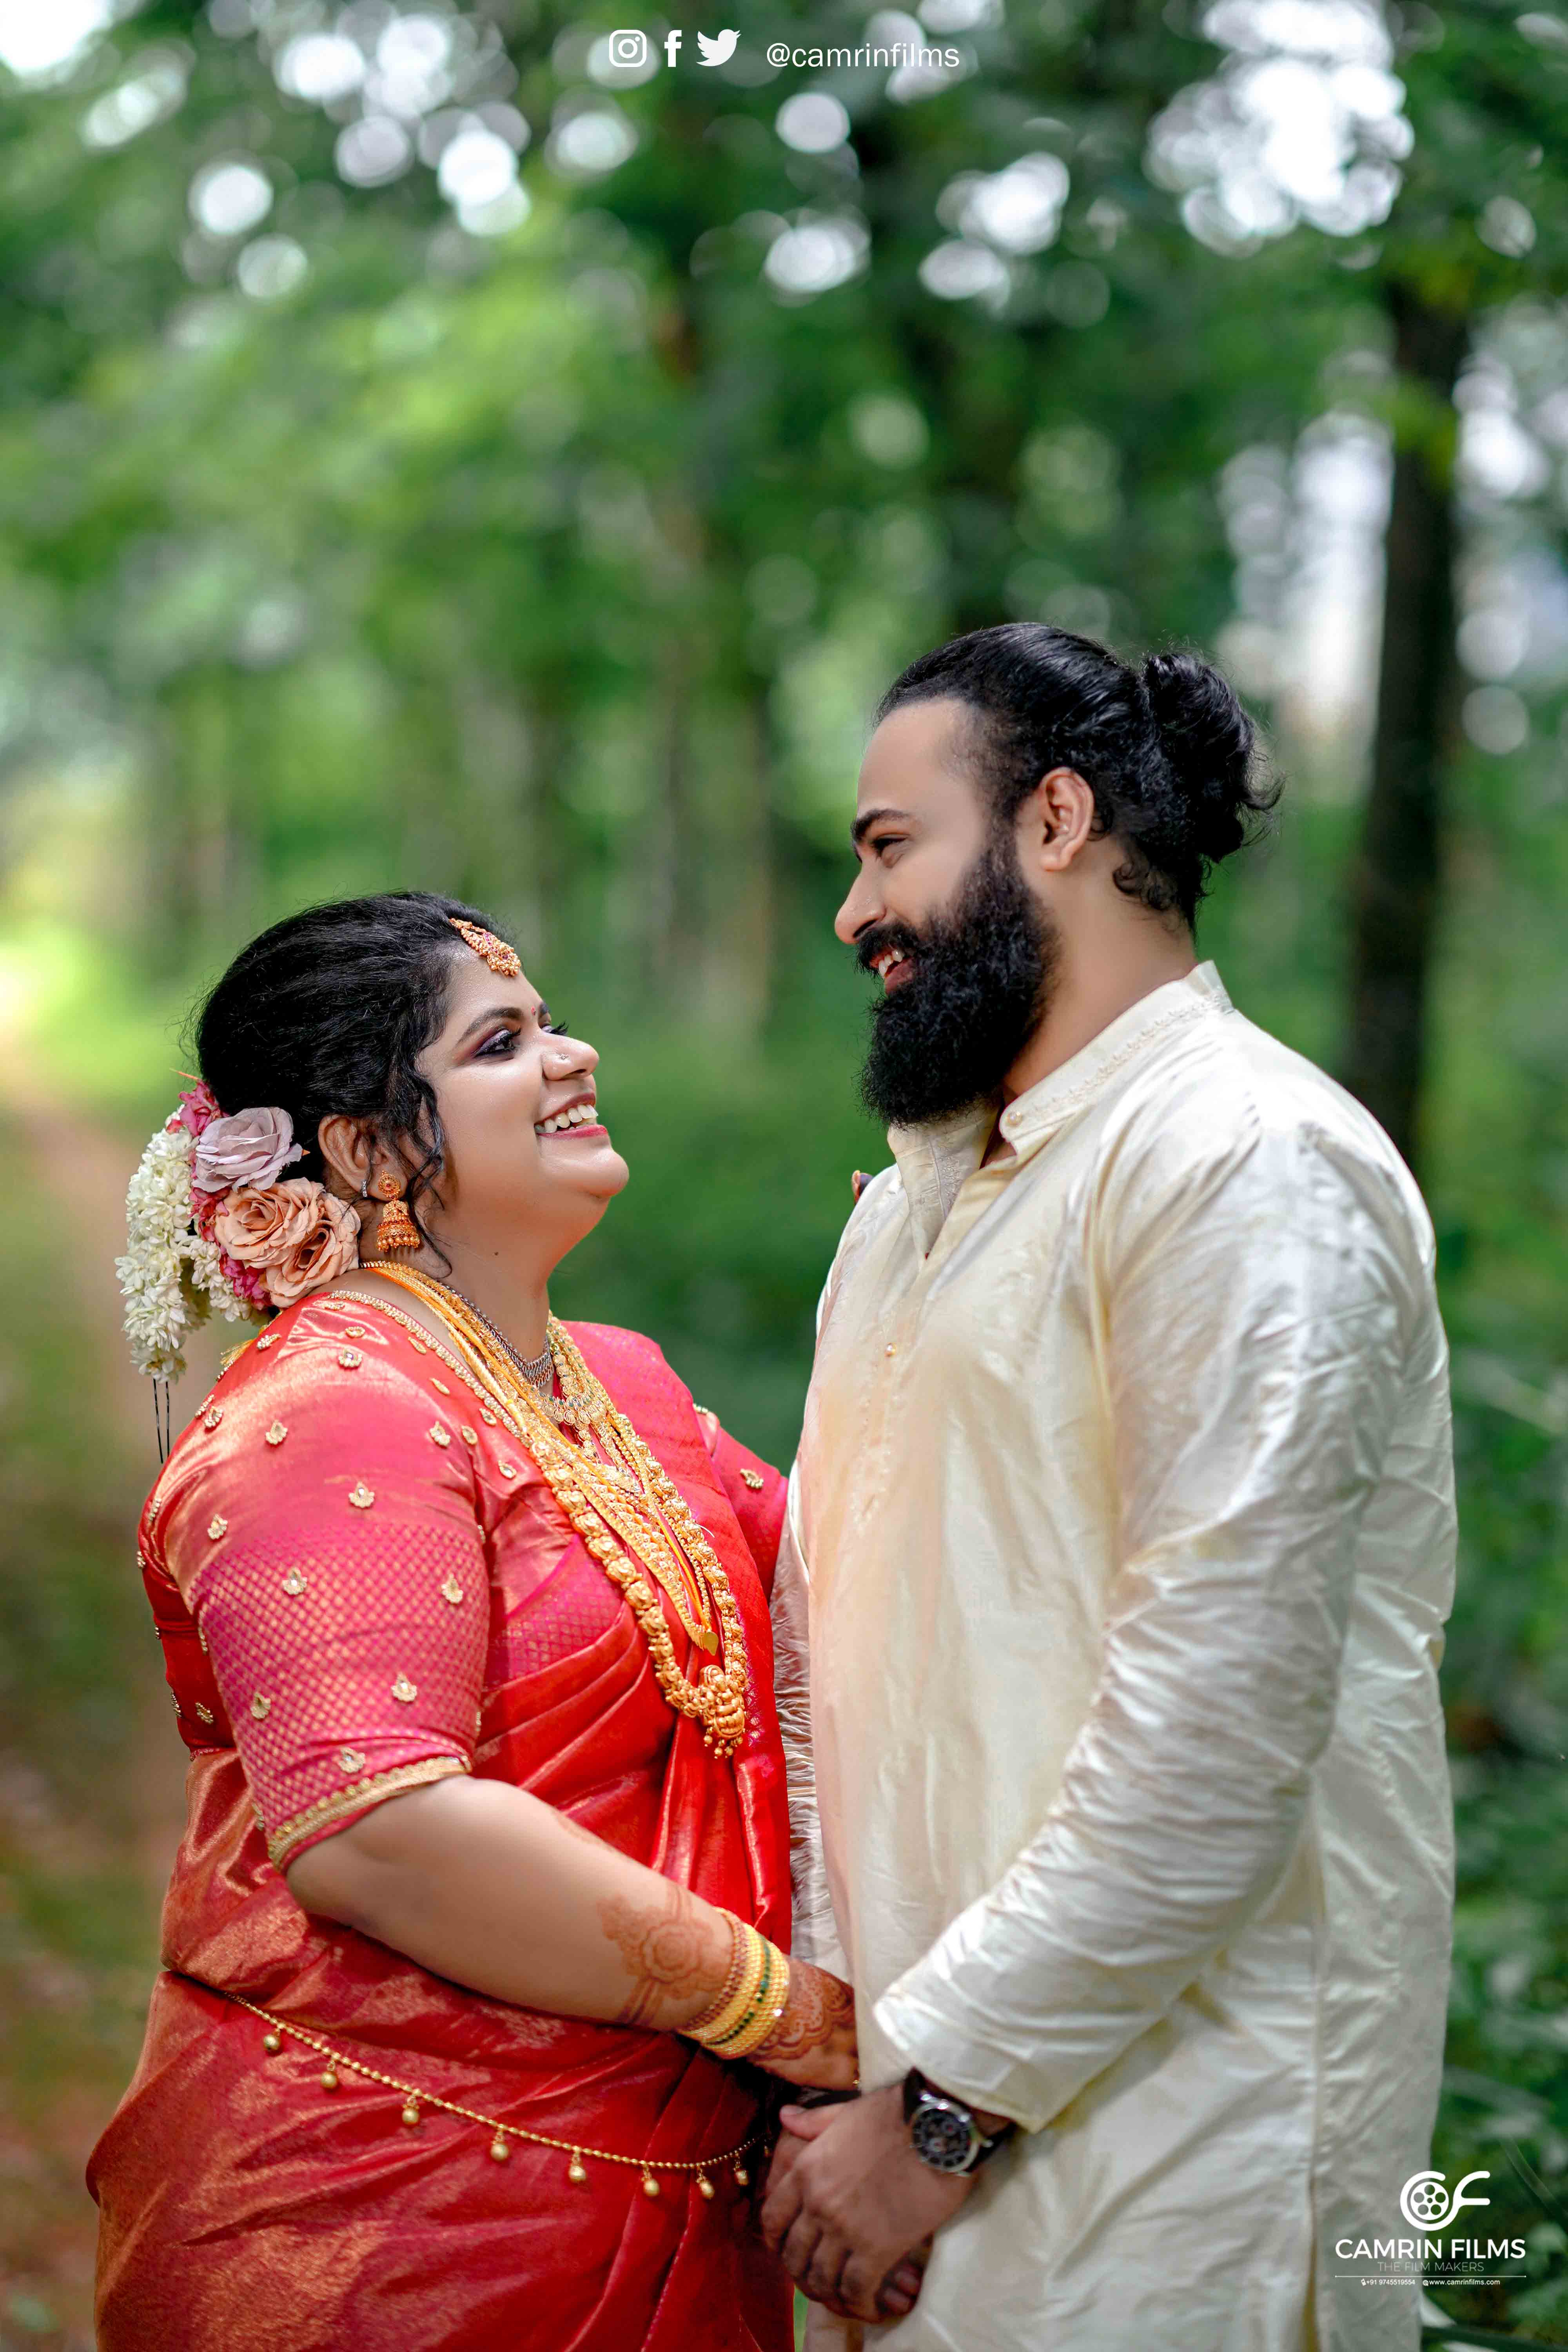 The Story of Vinutana & Harsha - All kinds of the first time in life  sometimes experience with college friends. — WEDDINGSCAPES - Award Winning  Wedding Photography